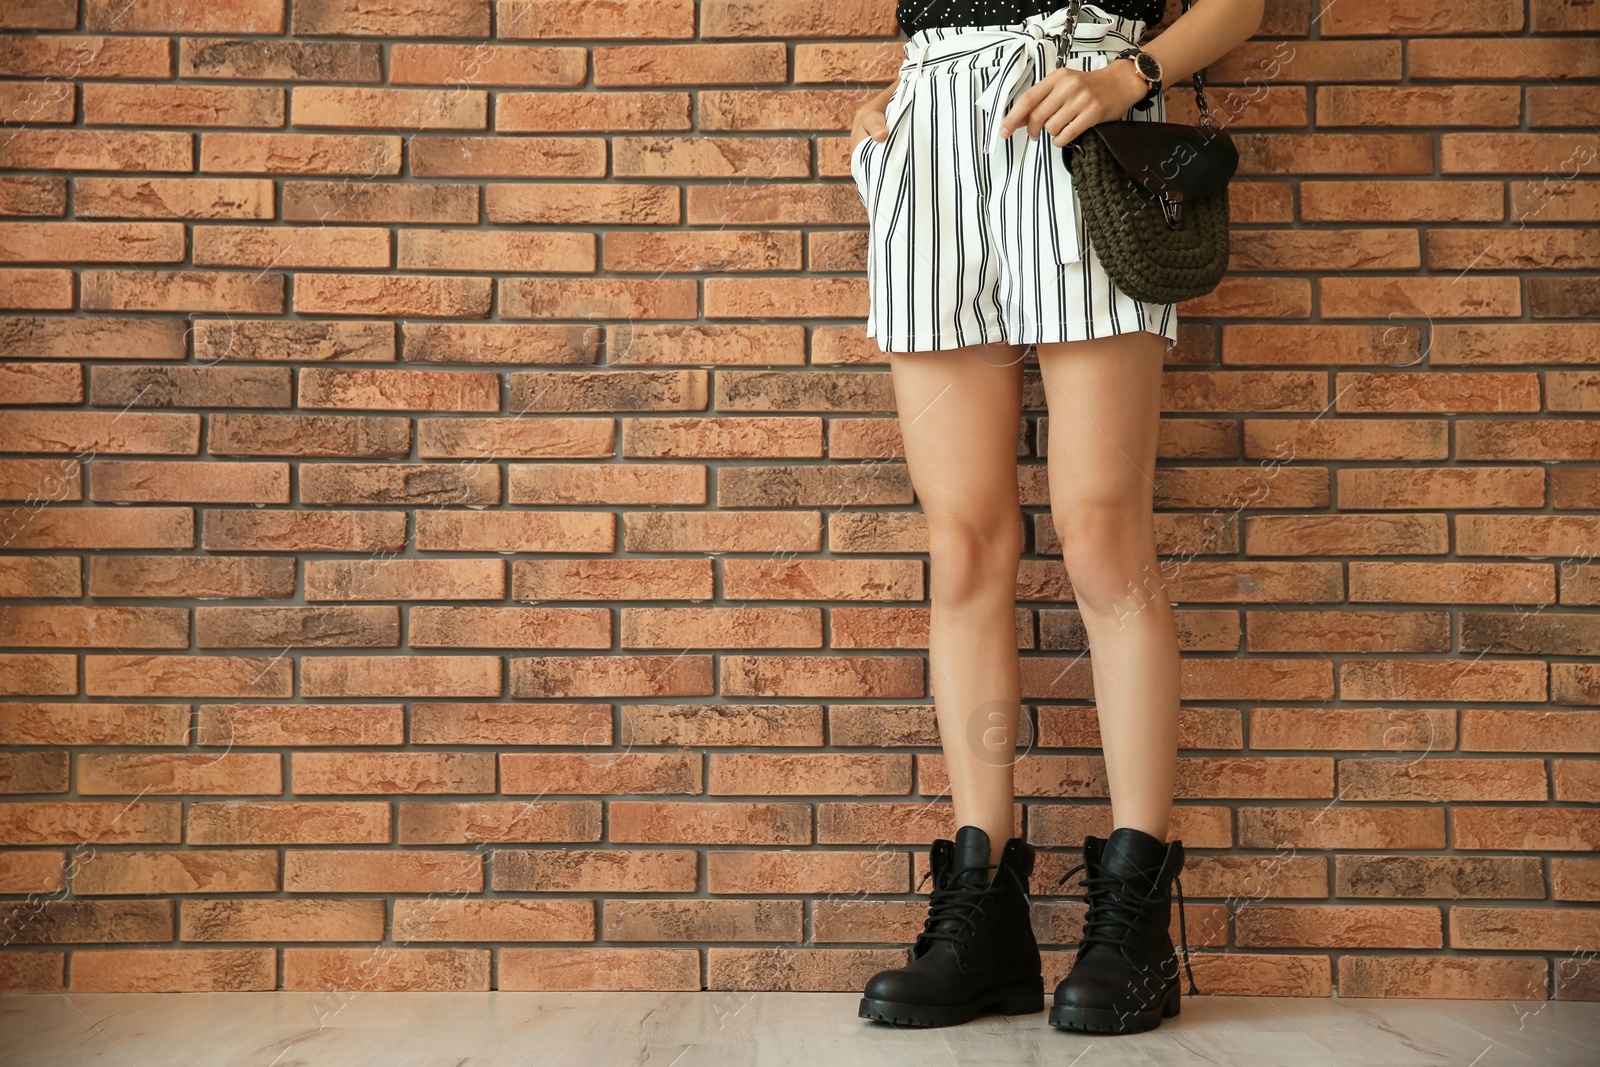 Photo of Young woman with sexy legs near brick wall